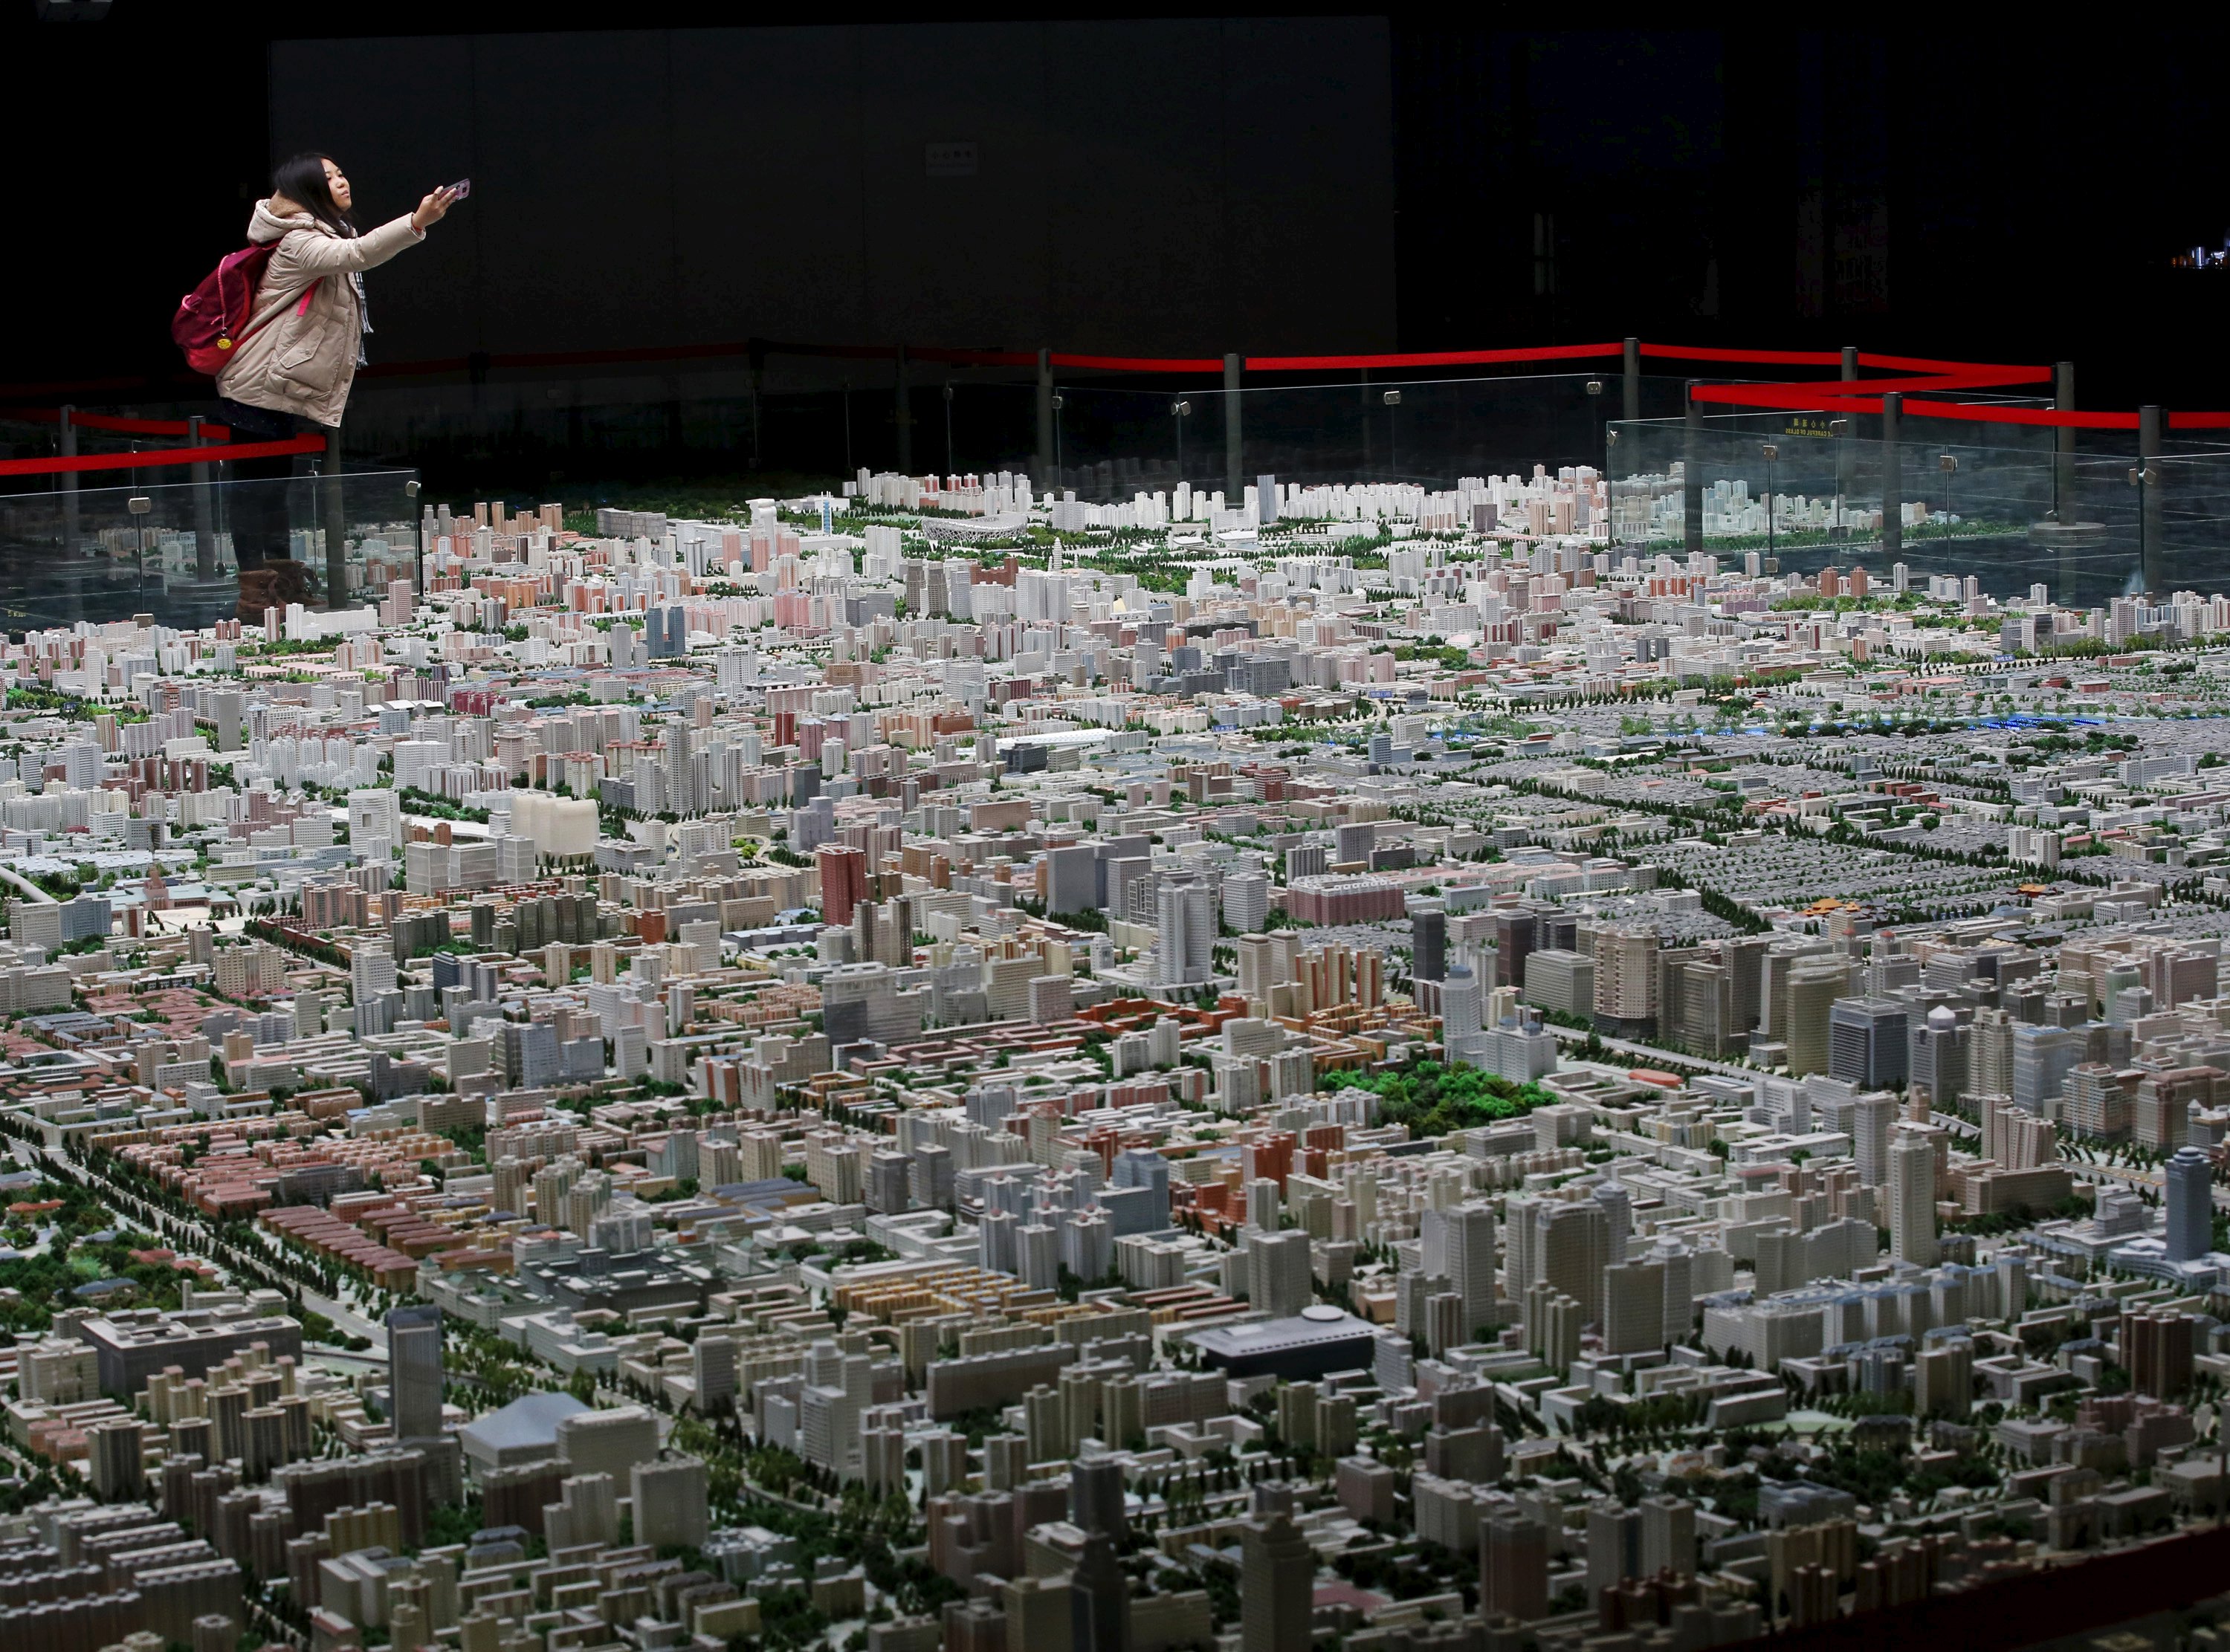 A visitor takes pictures of a model of Beijing's downtown at the Beijing Planning Exhibition Hall, a museum showcasing the achievement of Beijing urban planning construction, in Beijing in this November 5, 2013 file photo. For foreign investors, Beijing's decision to make it easier for them to invest in Chinese real estate is on the right track but has come at the wrong time. China announced last week that it was removing a series of cumbersome pieces of regulation on foreign property investment introduced in 2006 that have hindered investors from accessing what was once viewed as one of the most attractive real estate markets in the world. REUTERS/Kim Kyung-Hoon/Files